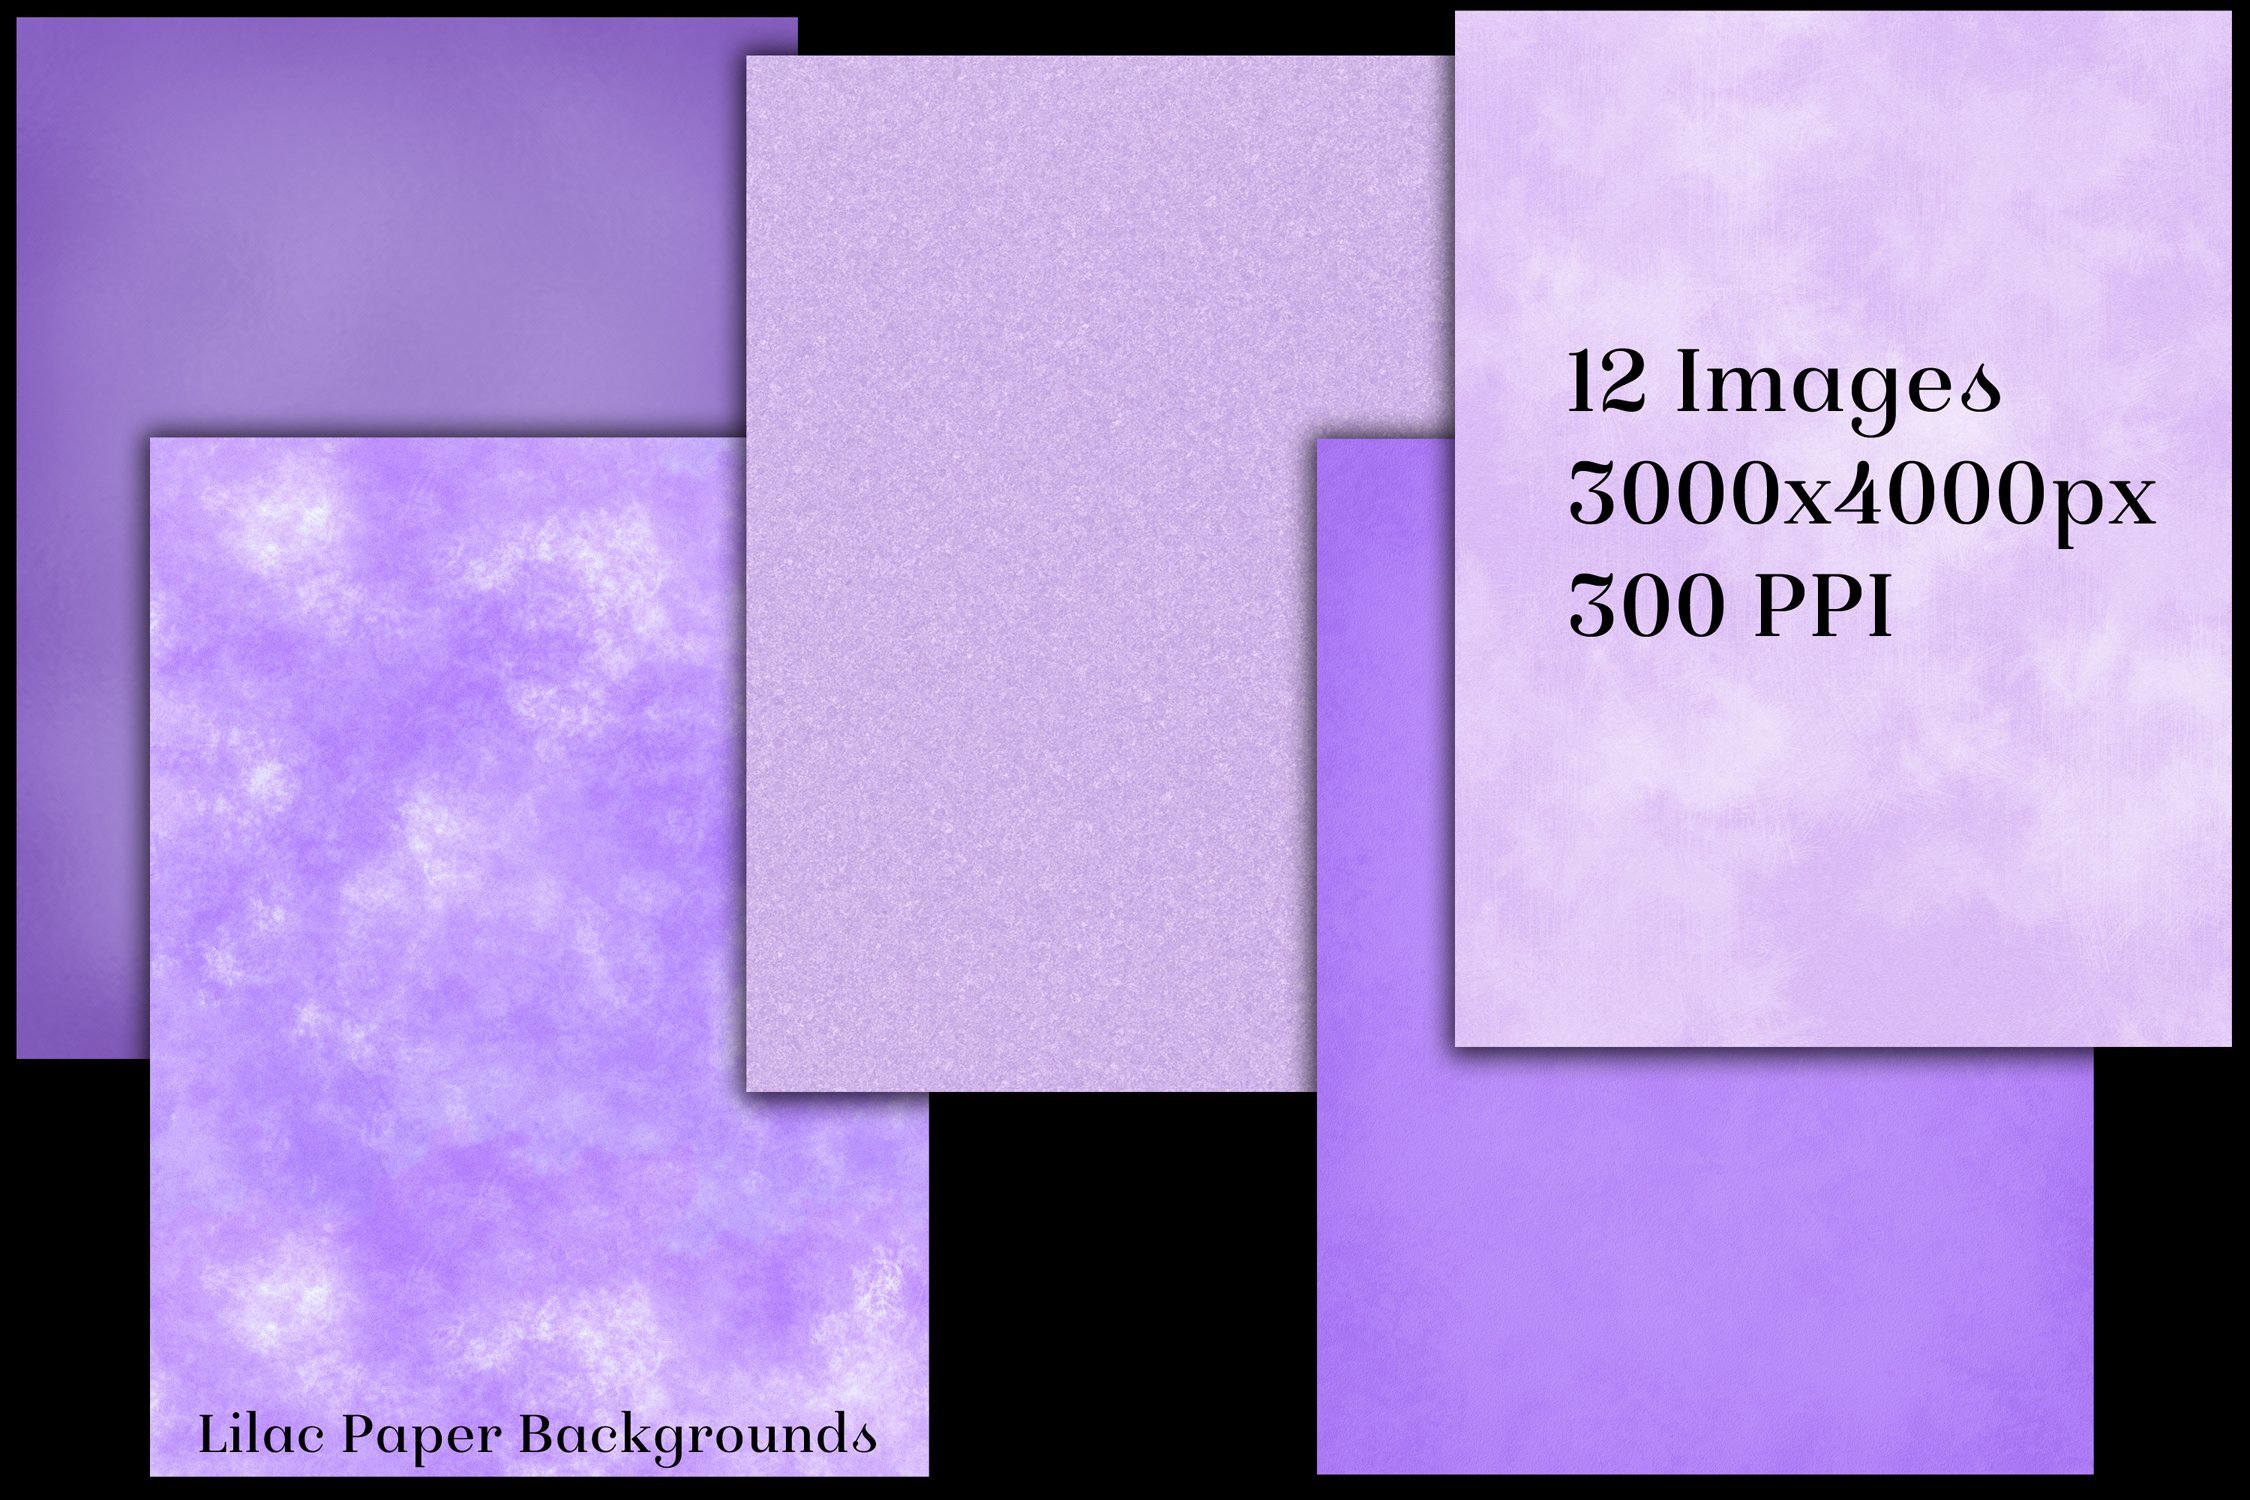 Lilac Paper Backgrounds preview image.